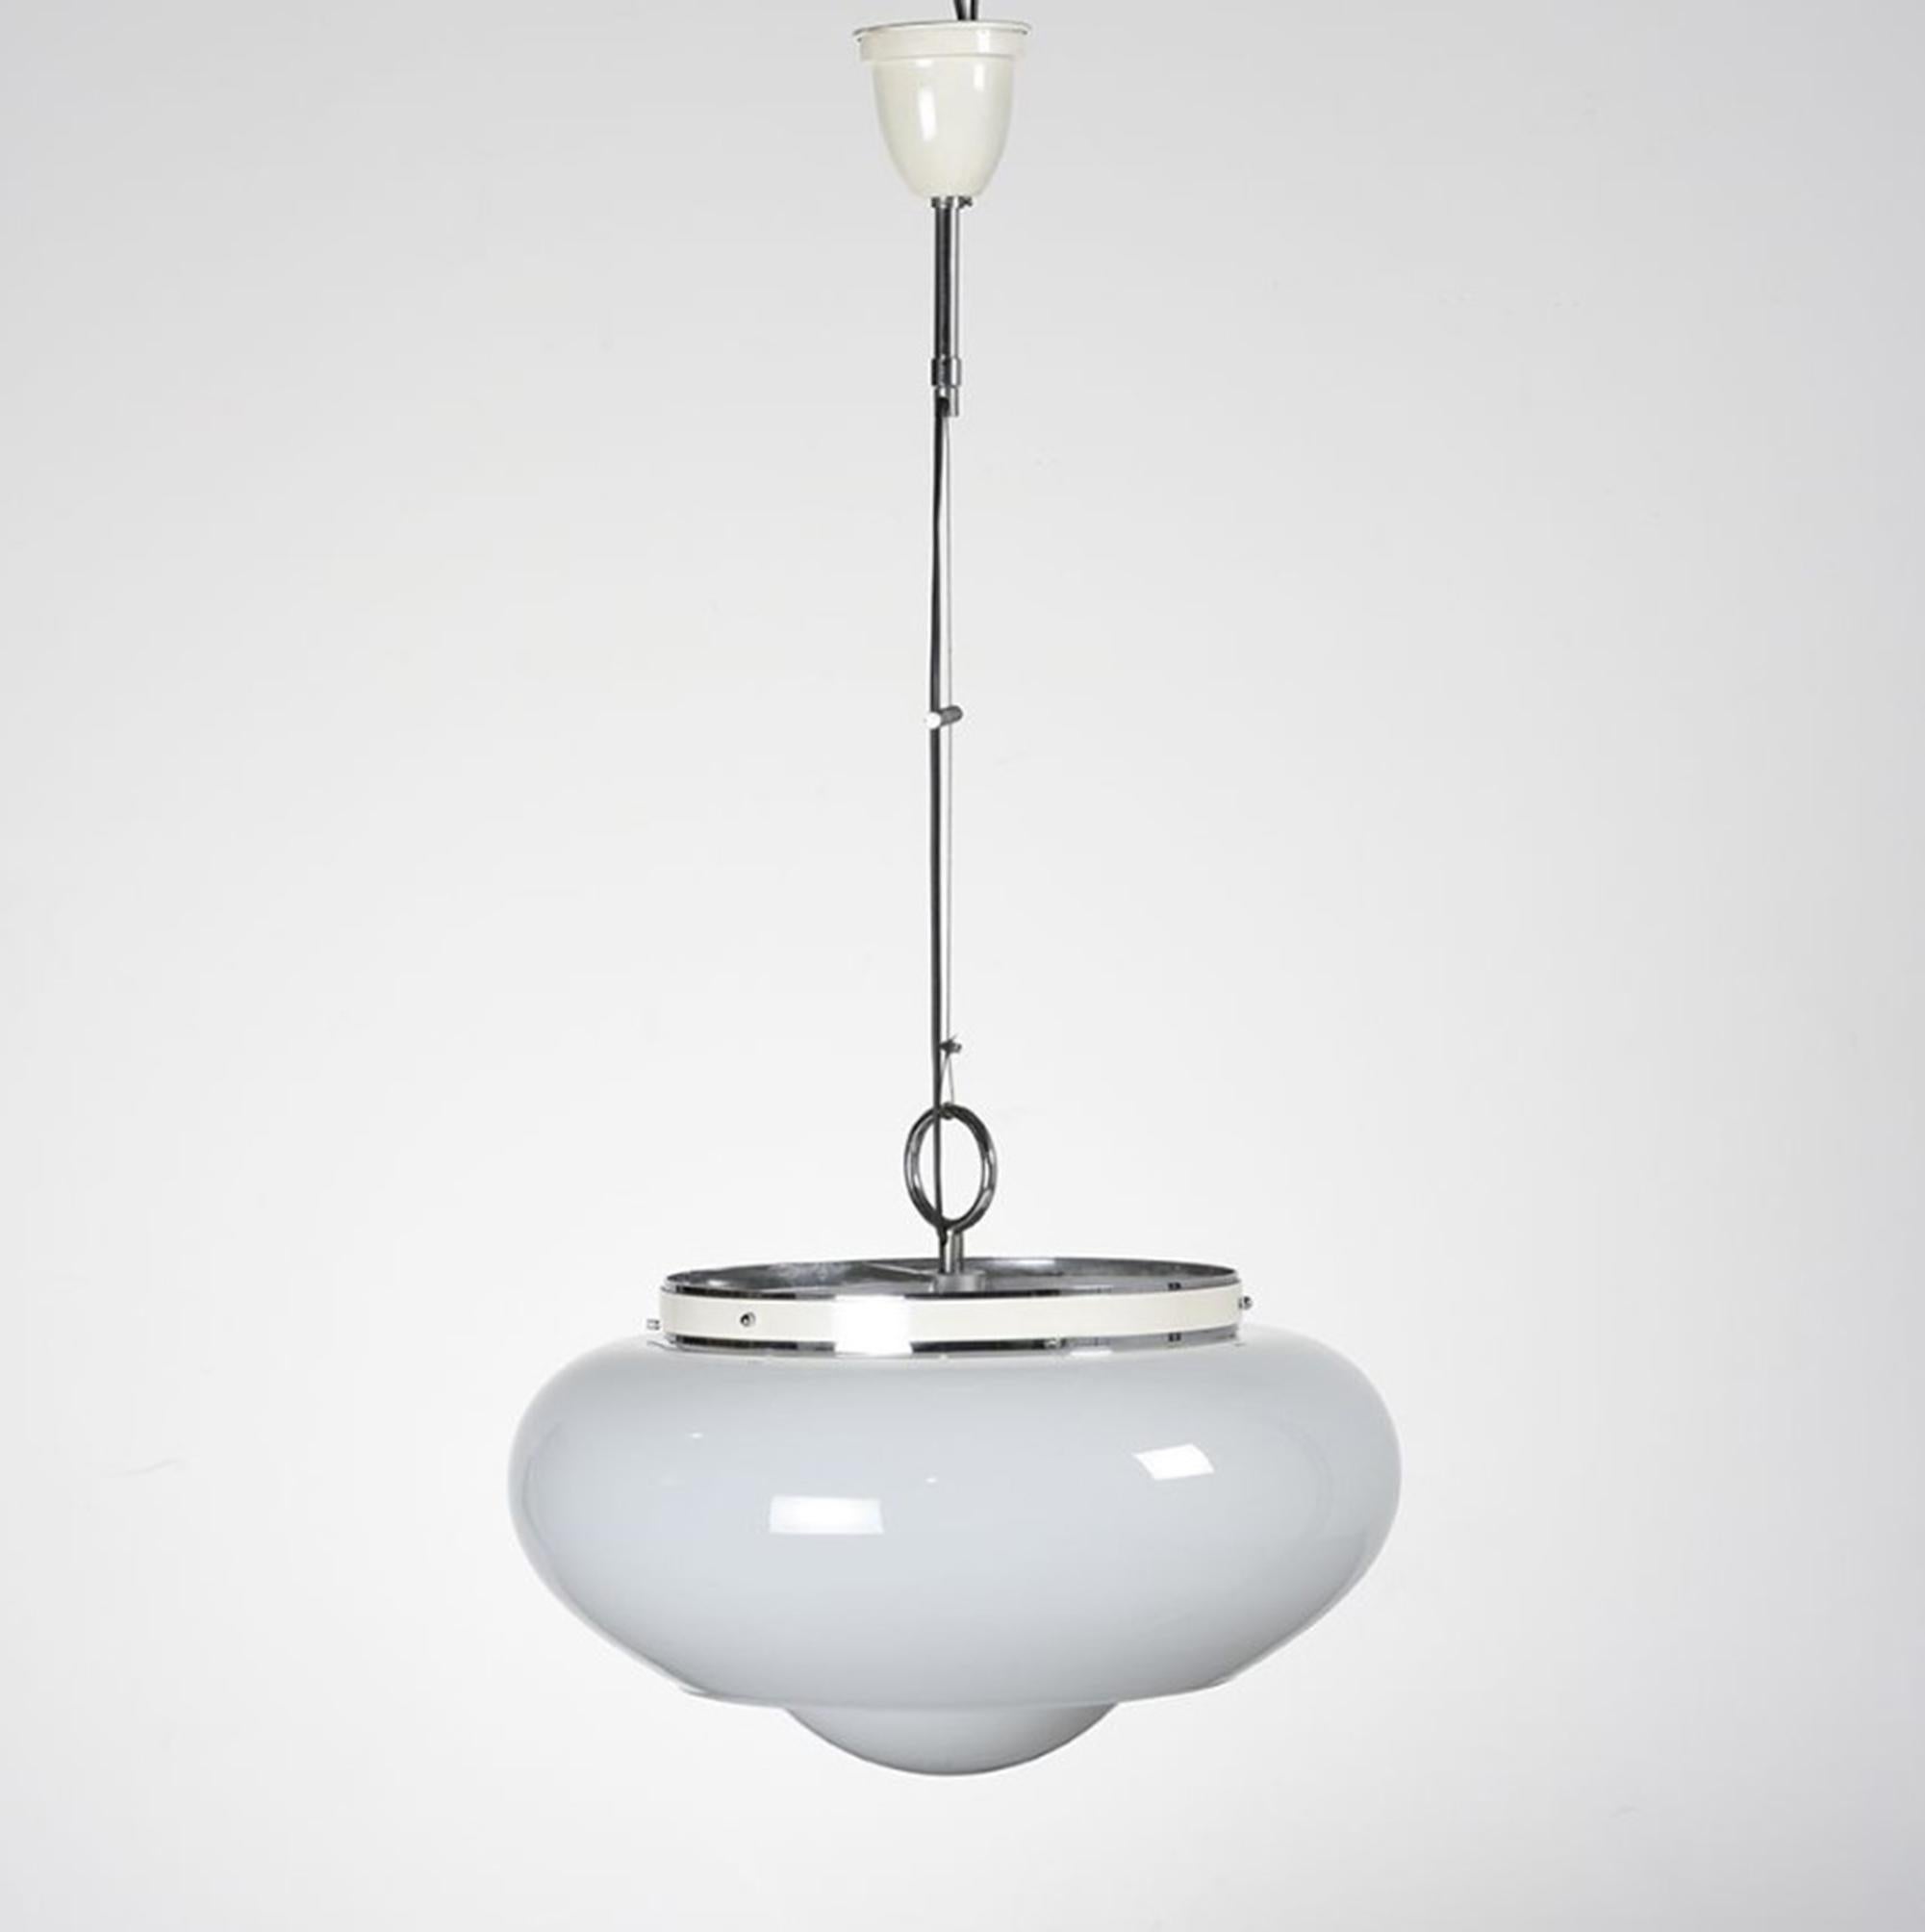 Late 20th Century Vintage Italian Murano Glass + Chrome-Plated Metal Pendant Lamp, 1970s For Sale